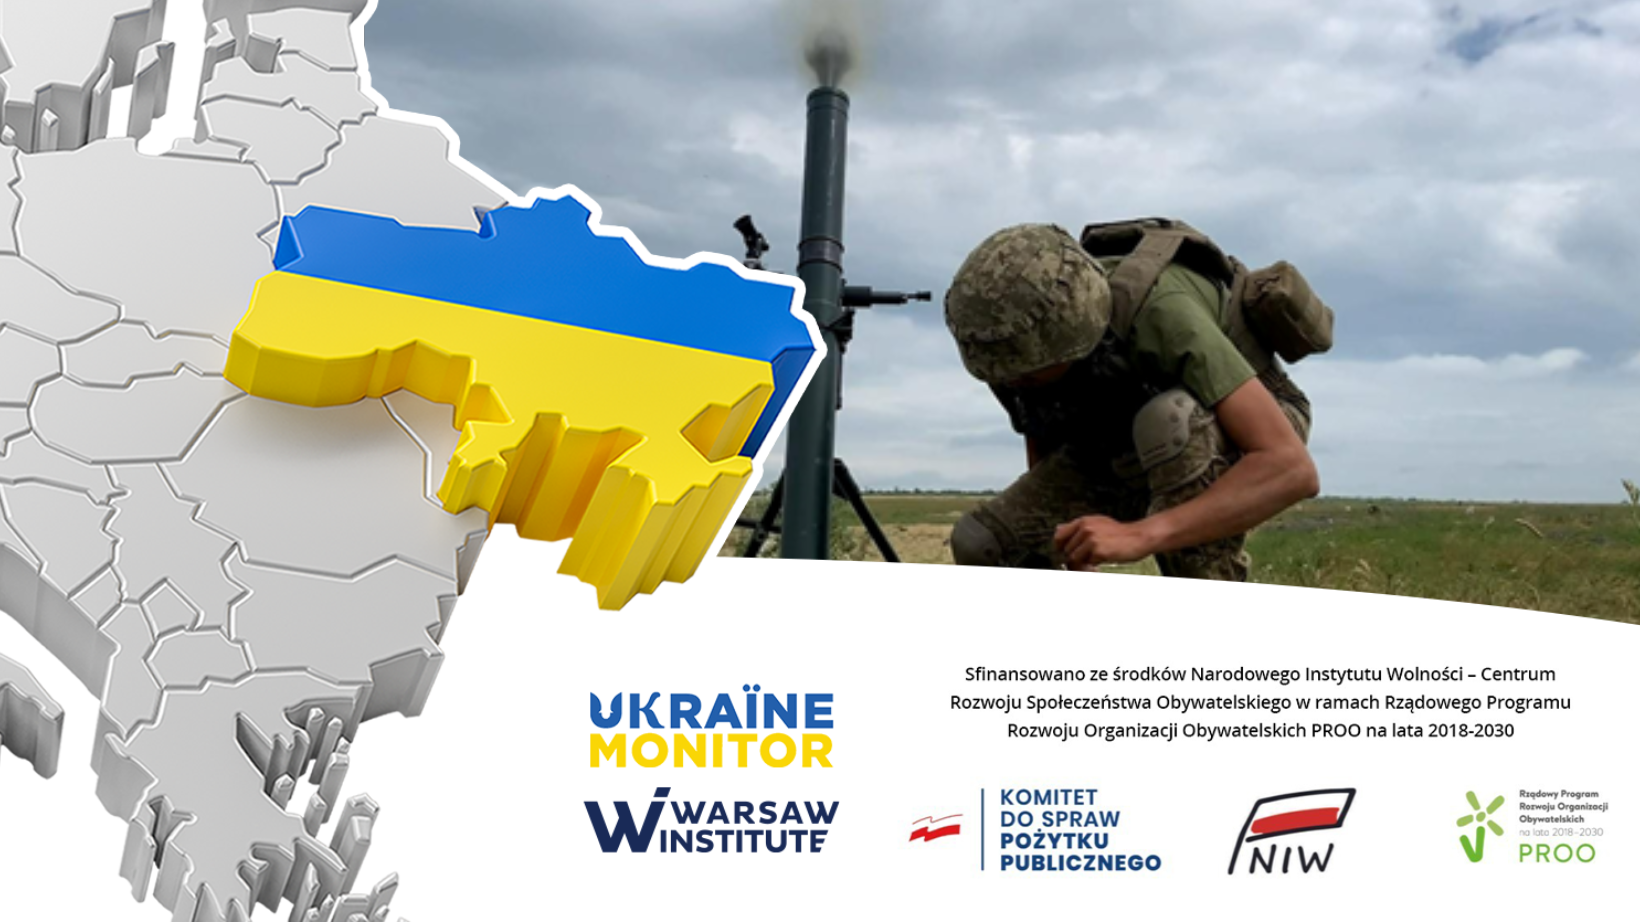 Ukraine’s Counteroffensive Continues At the War Chessboard